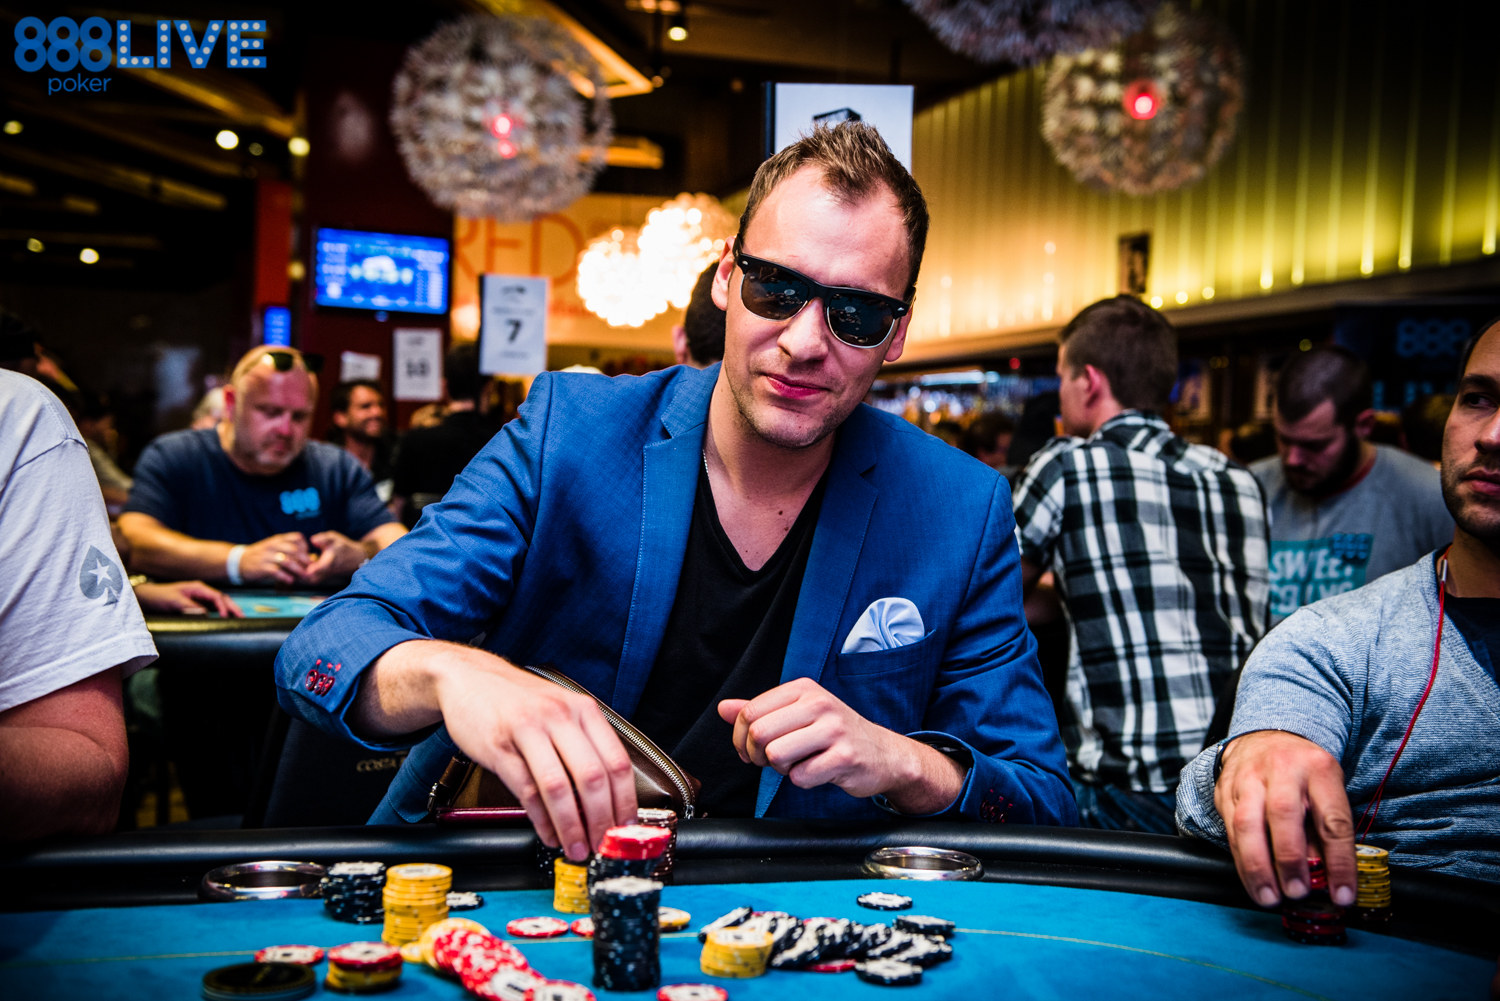 What to Wear When Playing Poker (Tells) - Essentials